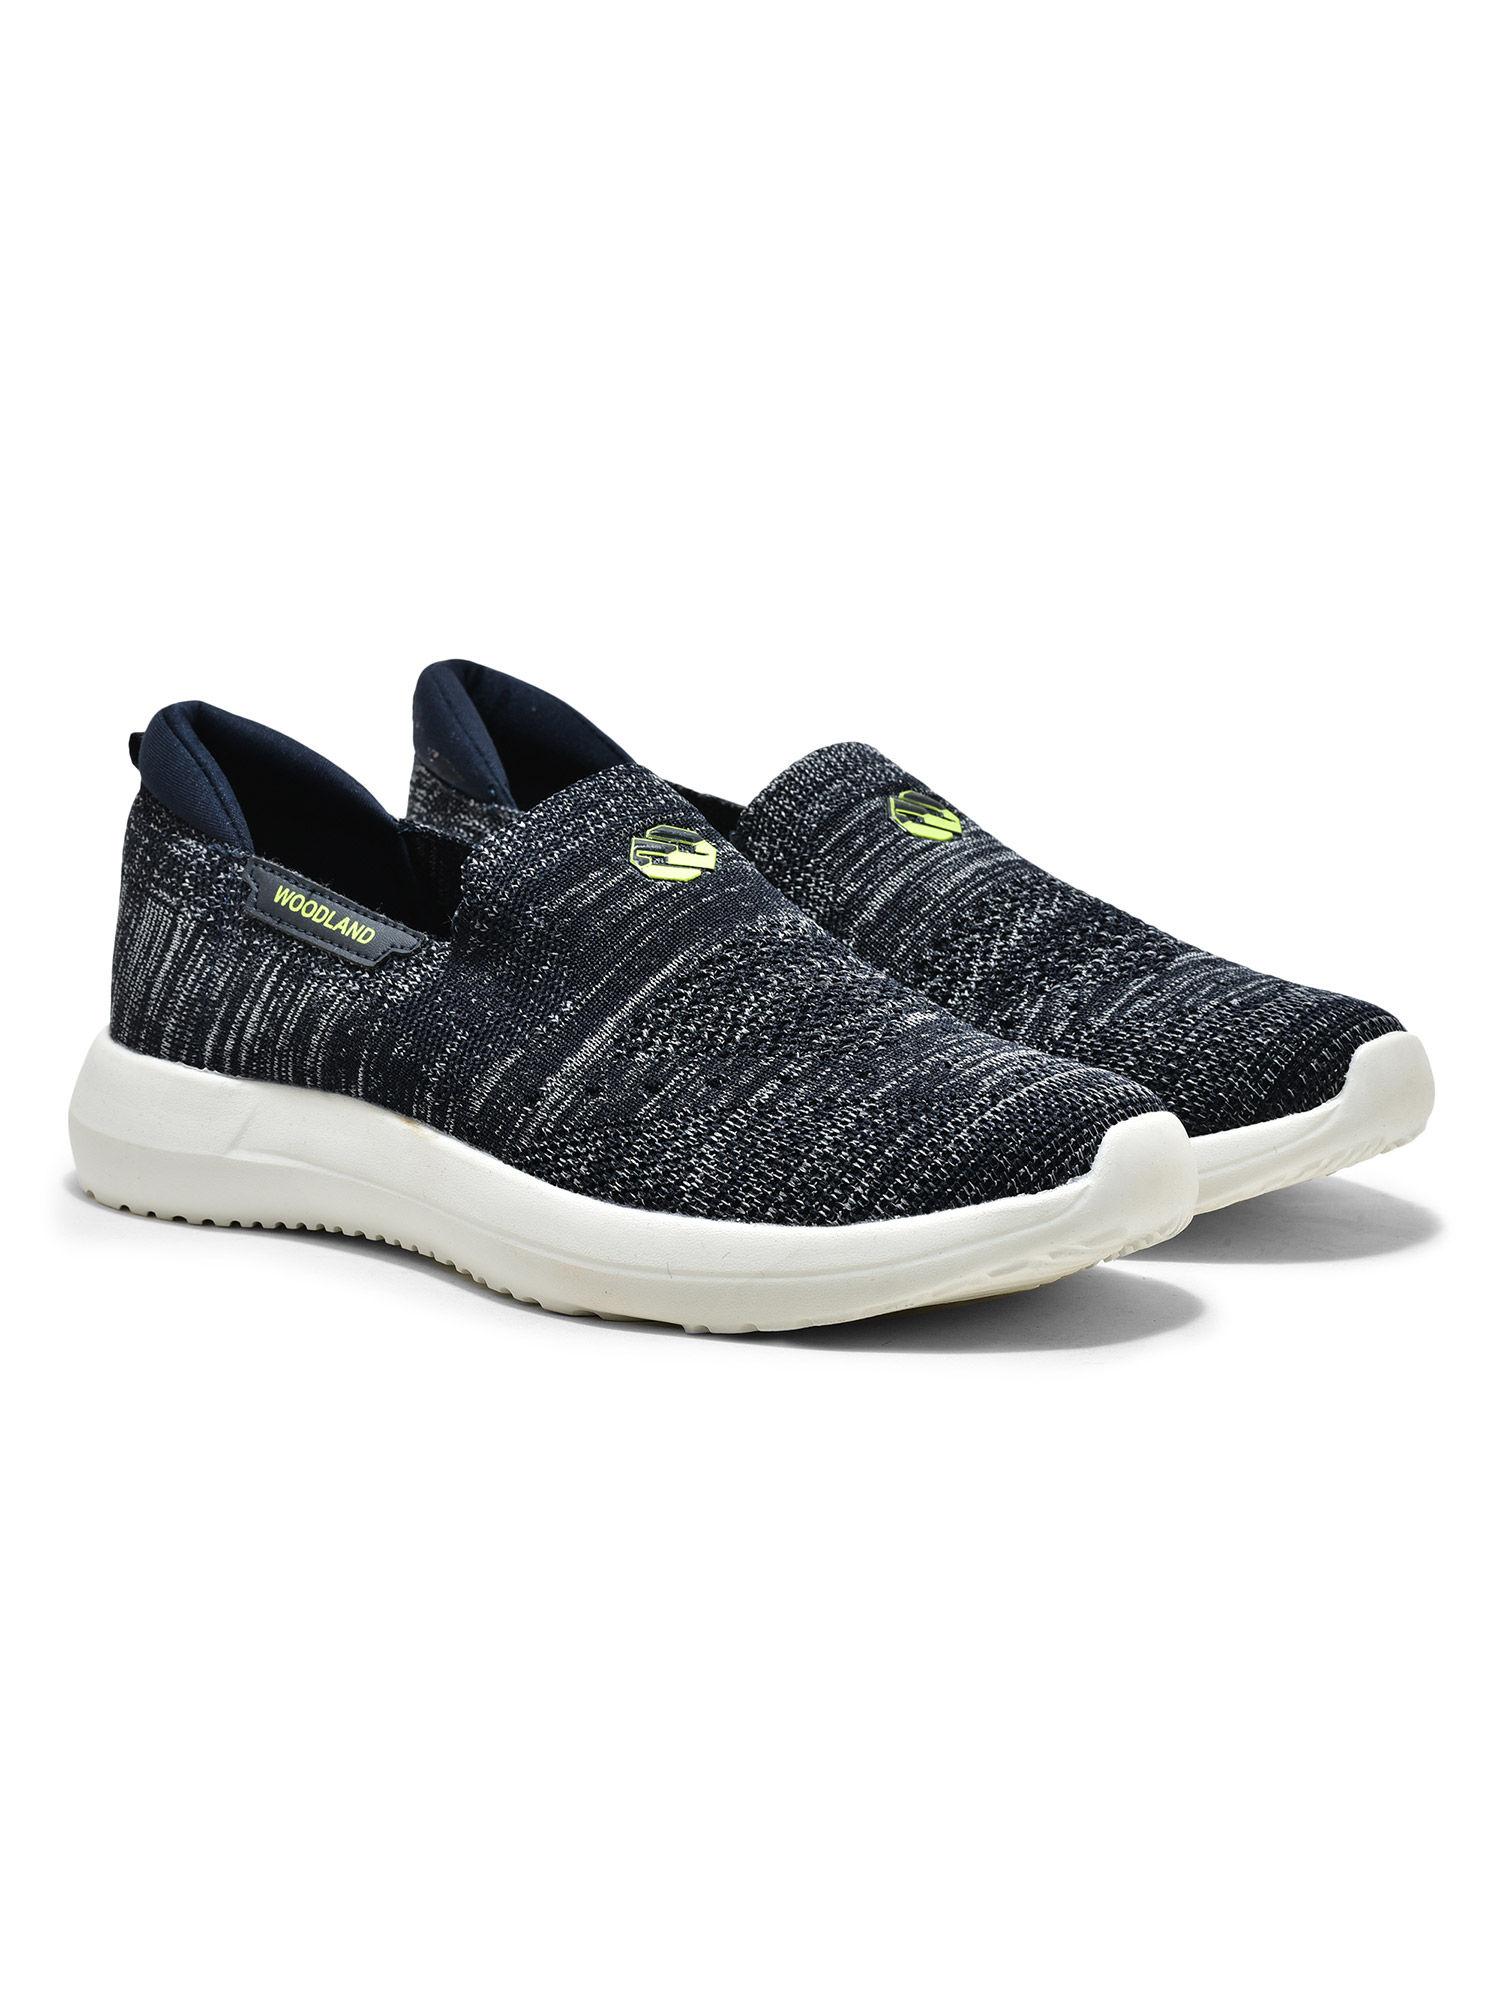 mens navy blue sports shoes